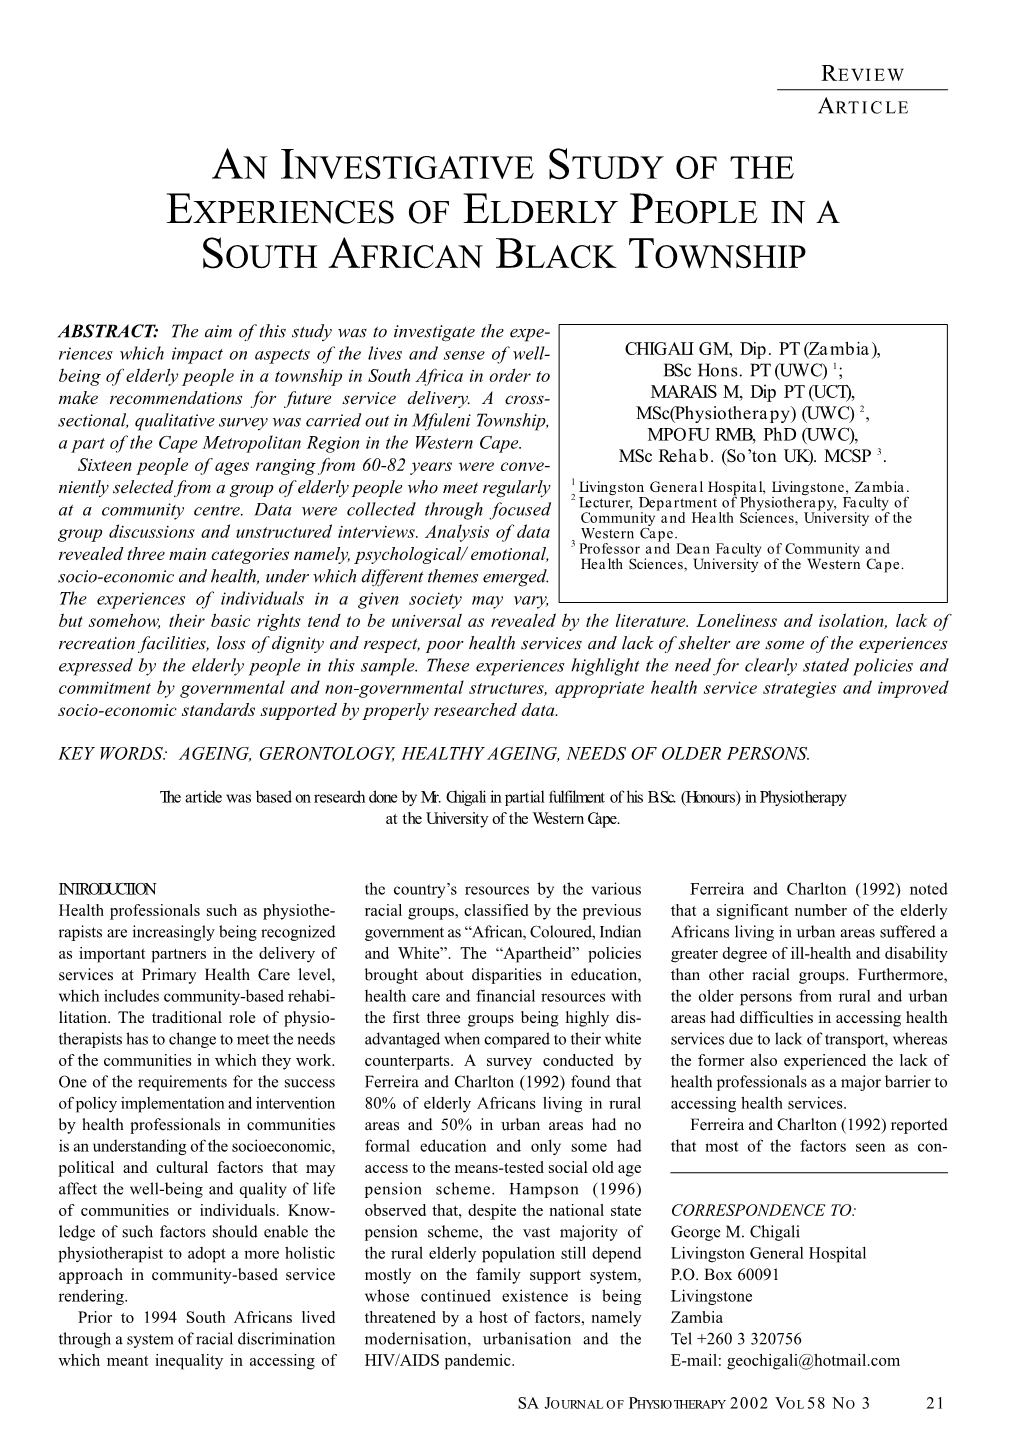 An Investigative Study of the Experiences of Elderly People in a South African Black Township